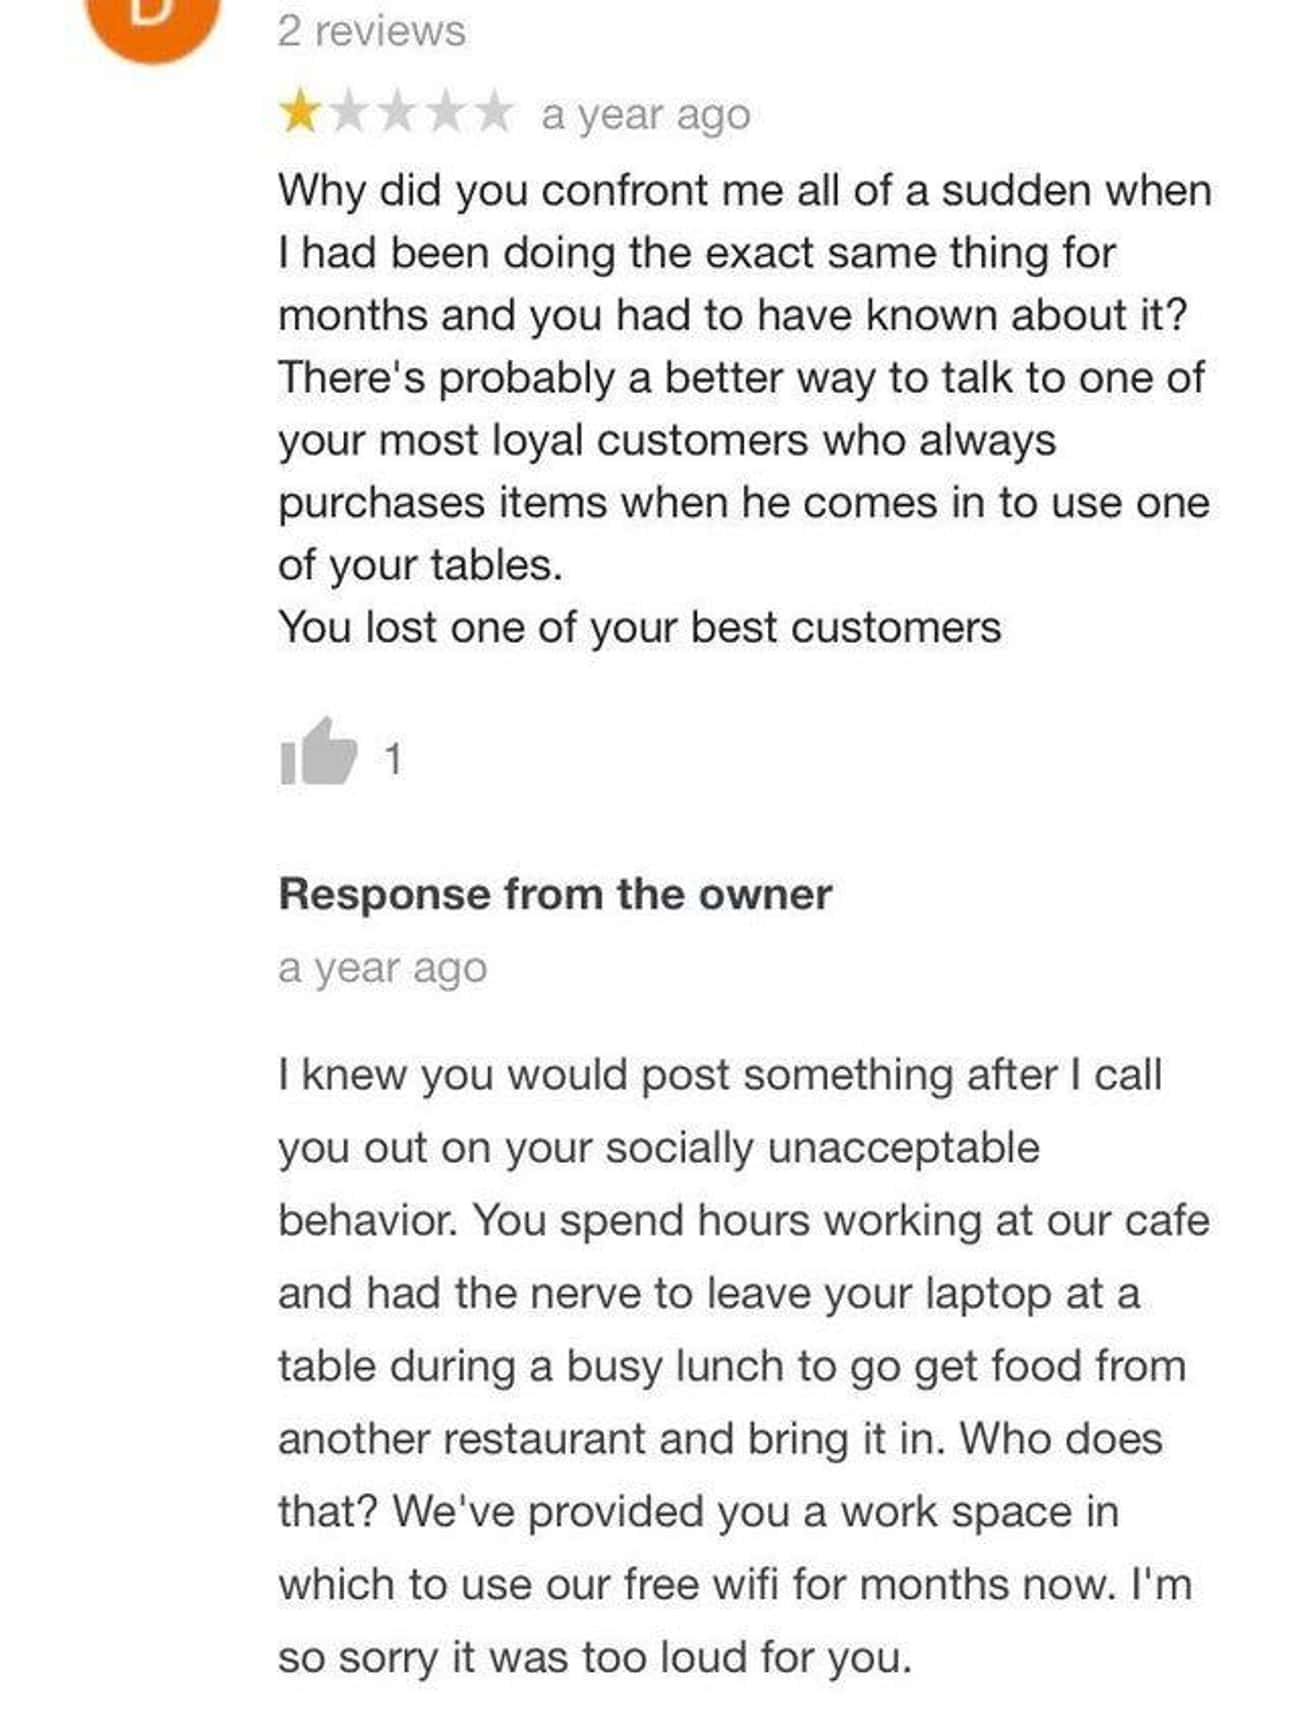 Choosing Beggar Angry About Being Kicked Out Of A Cafe With Free Wi-Fi After Bringing In Food From Another Restaurant